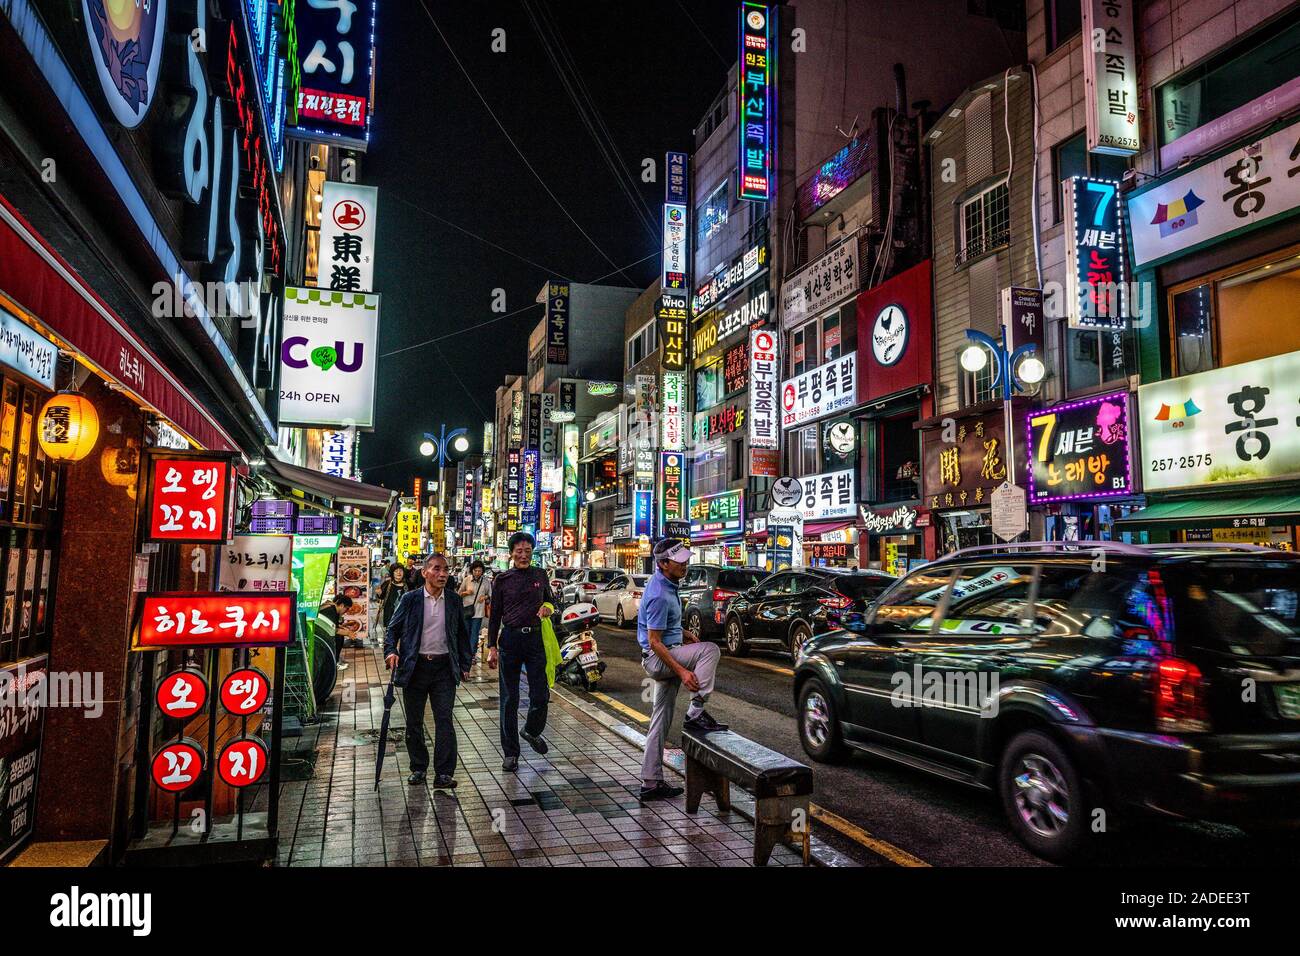 Busan Korea, 1 October 2019 : Busan busy street at night with people traffic and illuminated restaurants and shops signs in Busan South Korea Stock Photo